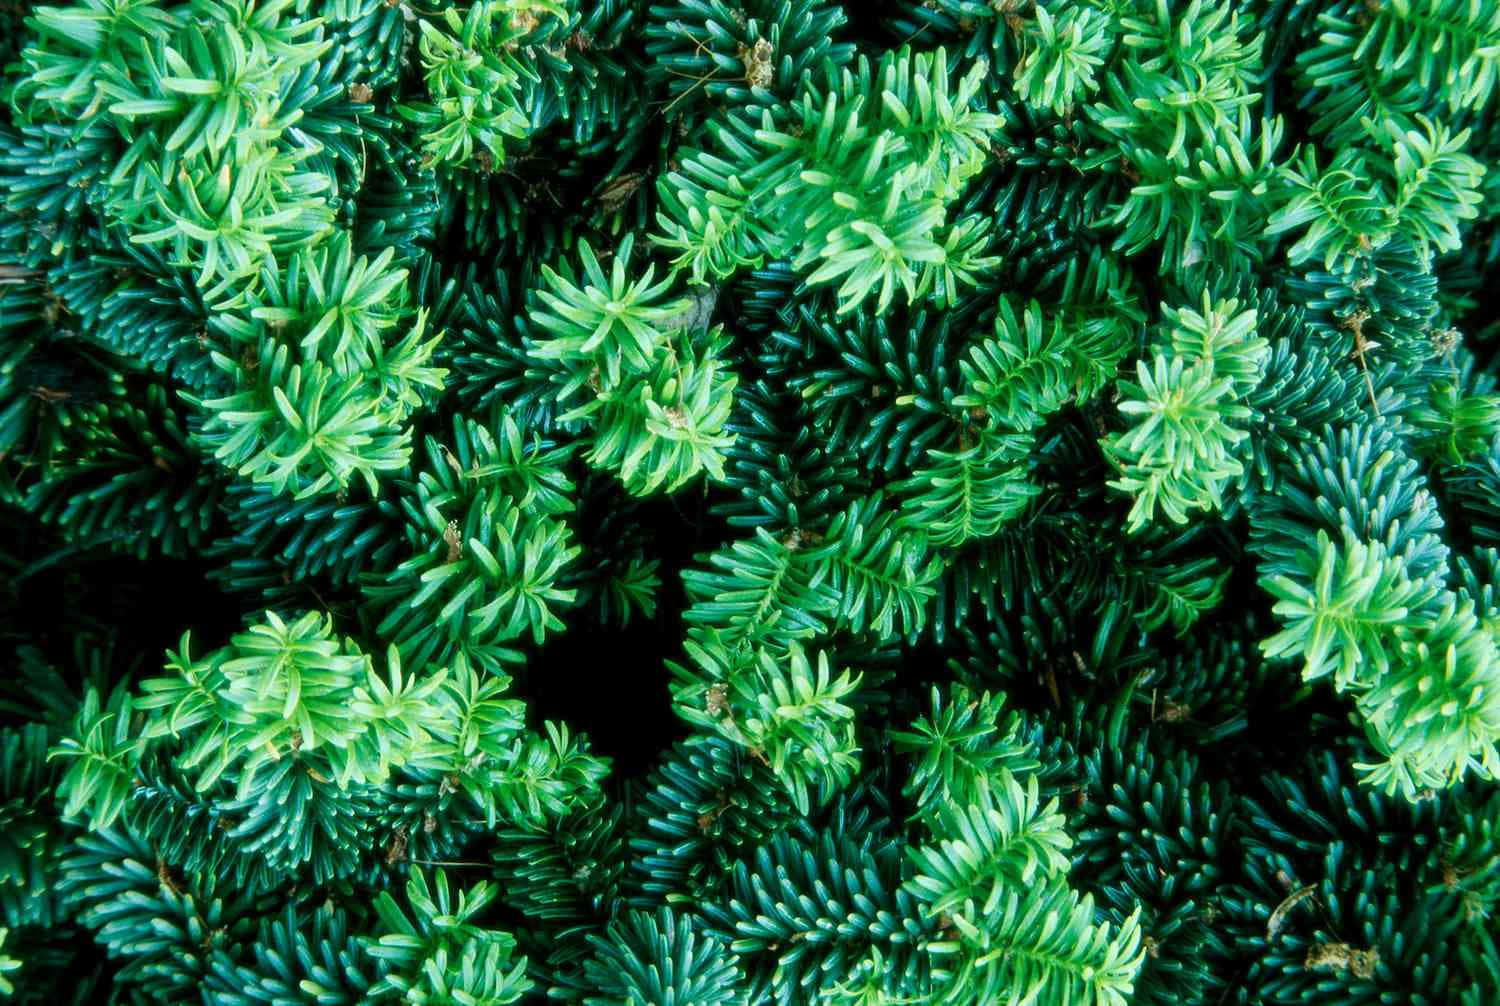 Bunched Up Green Yew Shrubs Wallpaper